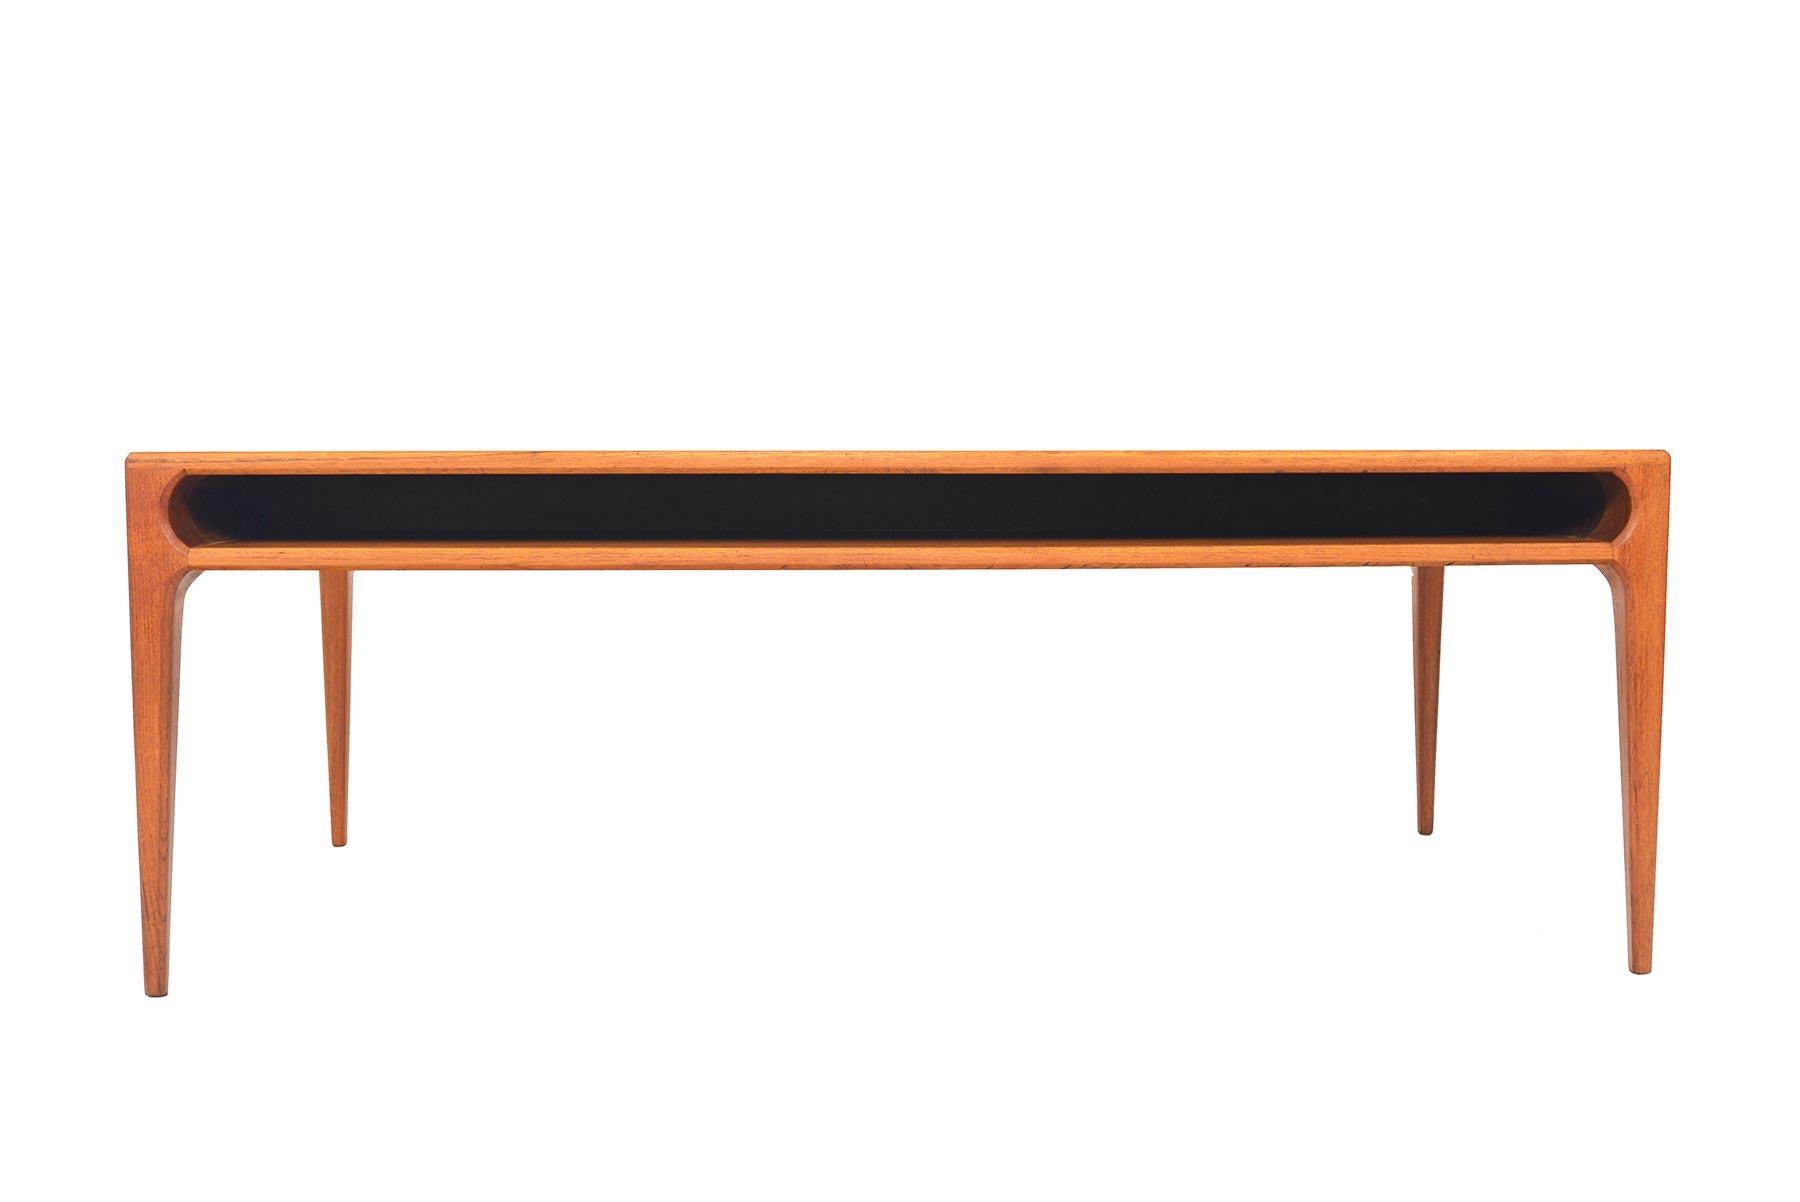 This Danish modern midcentury coffee table in teak was designed by Johannes Andersen in the 1960s. Expertly built, this gorgeous piece features solid teak legs which are seamlessly joined to the table top. The table offers a large cubby for storage.